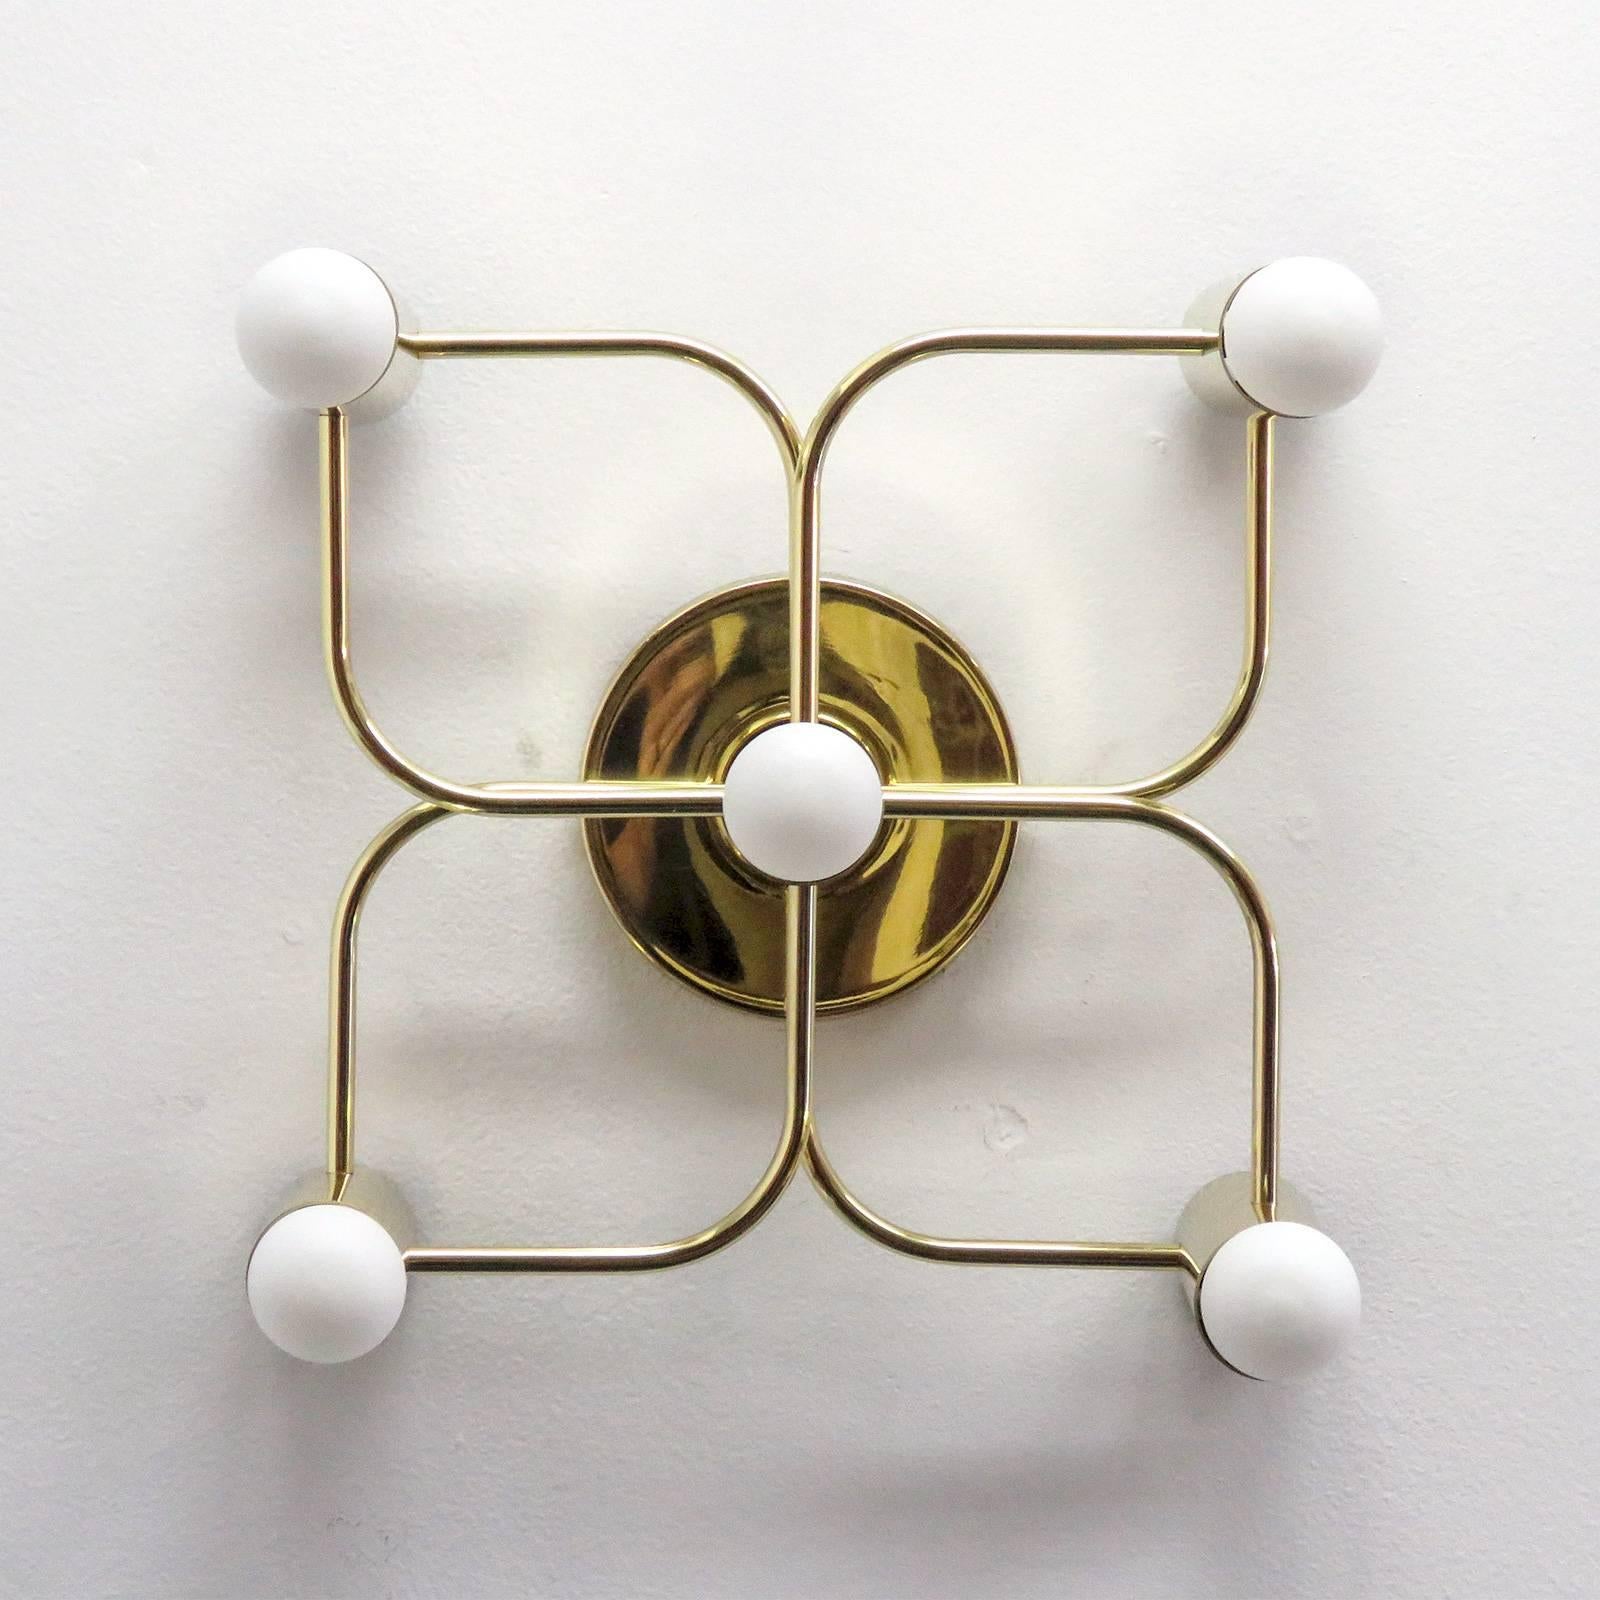 Wonderful German five-light polished brass flush mount lights, can be used as wall or ceiling lights. Priced individually.